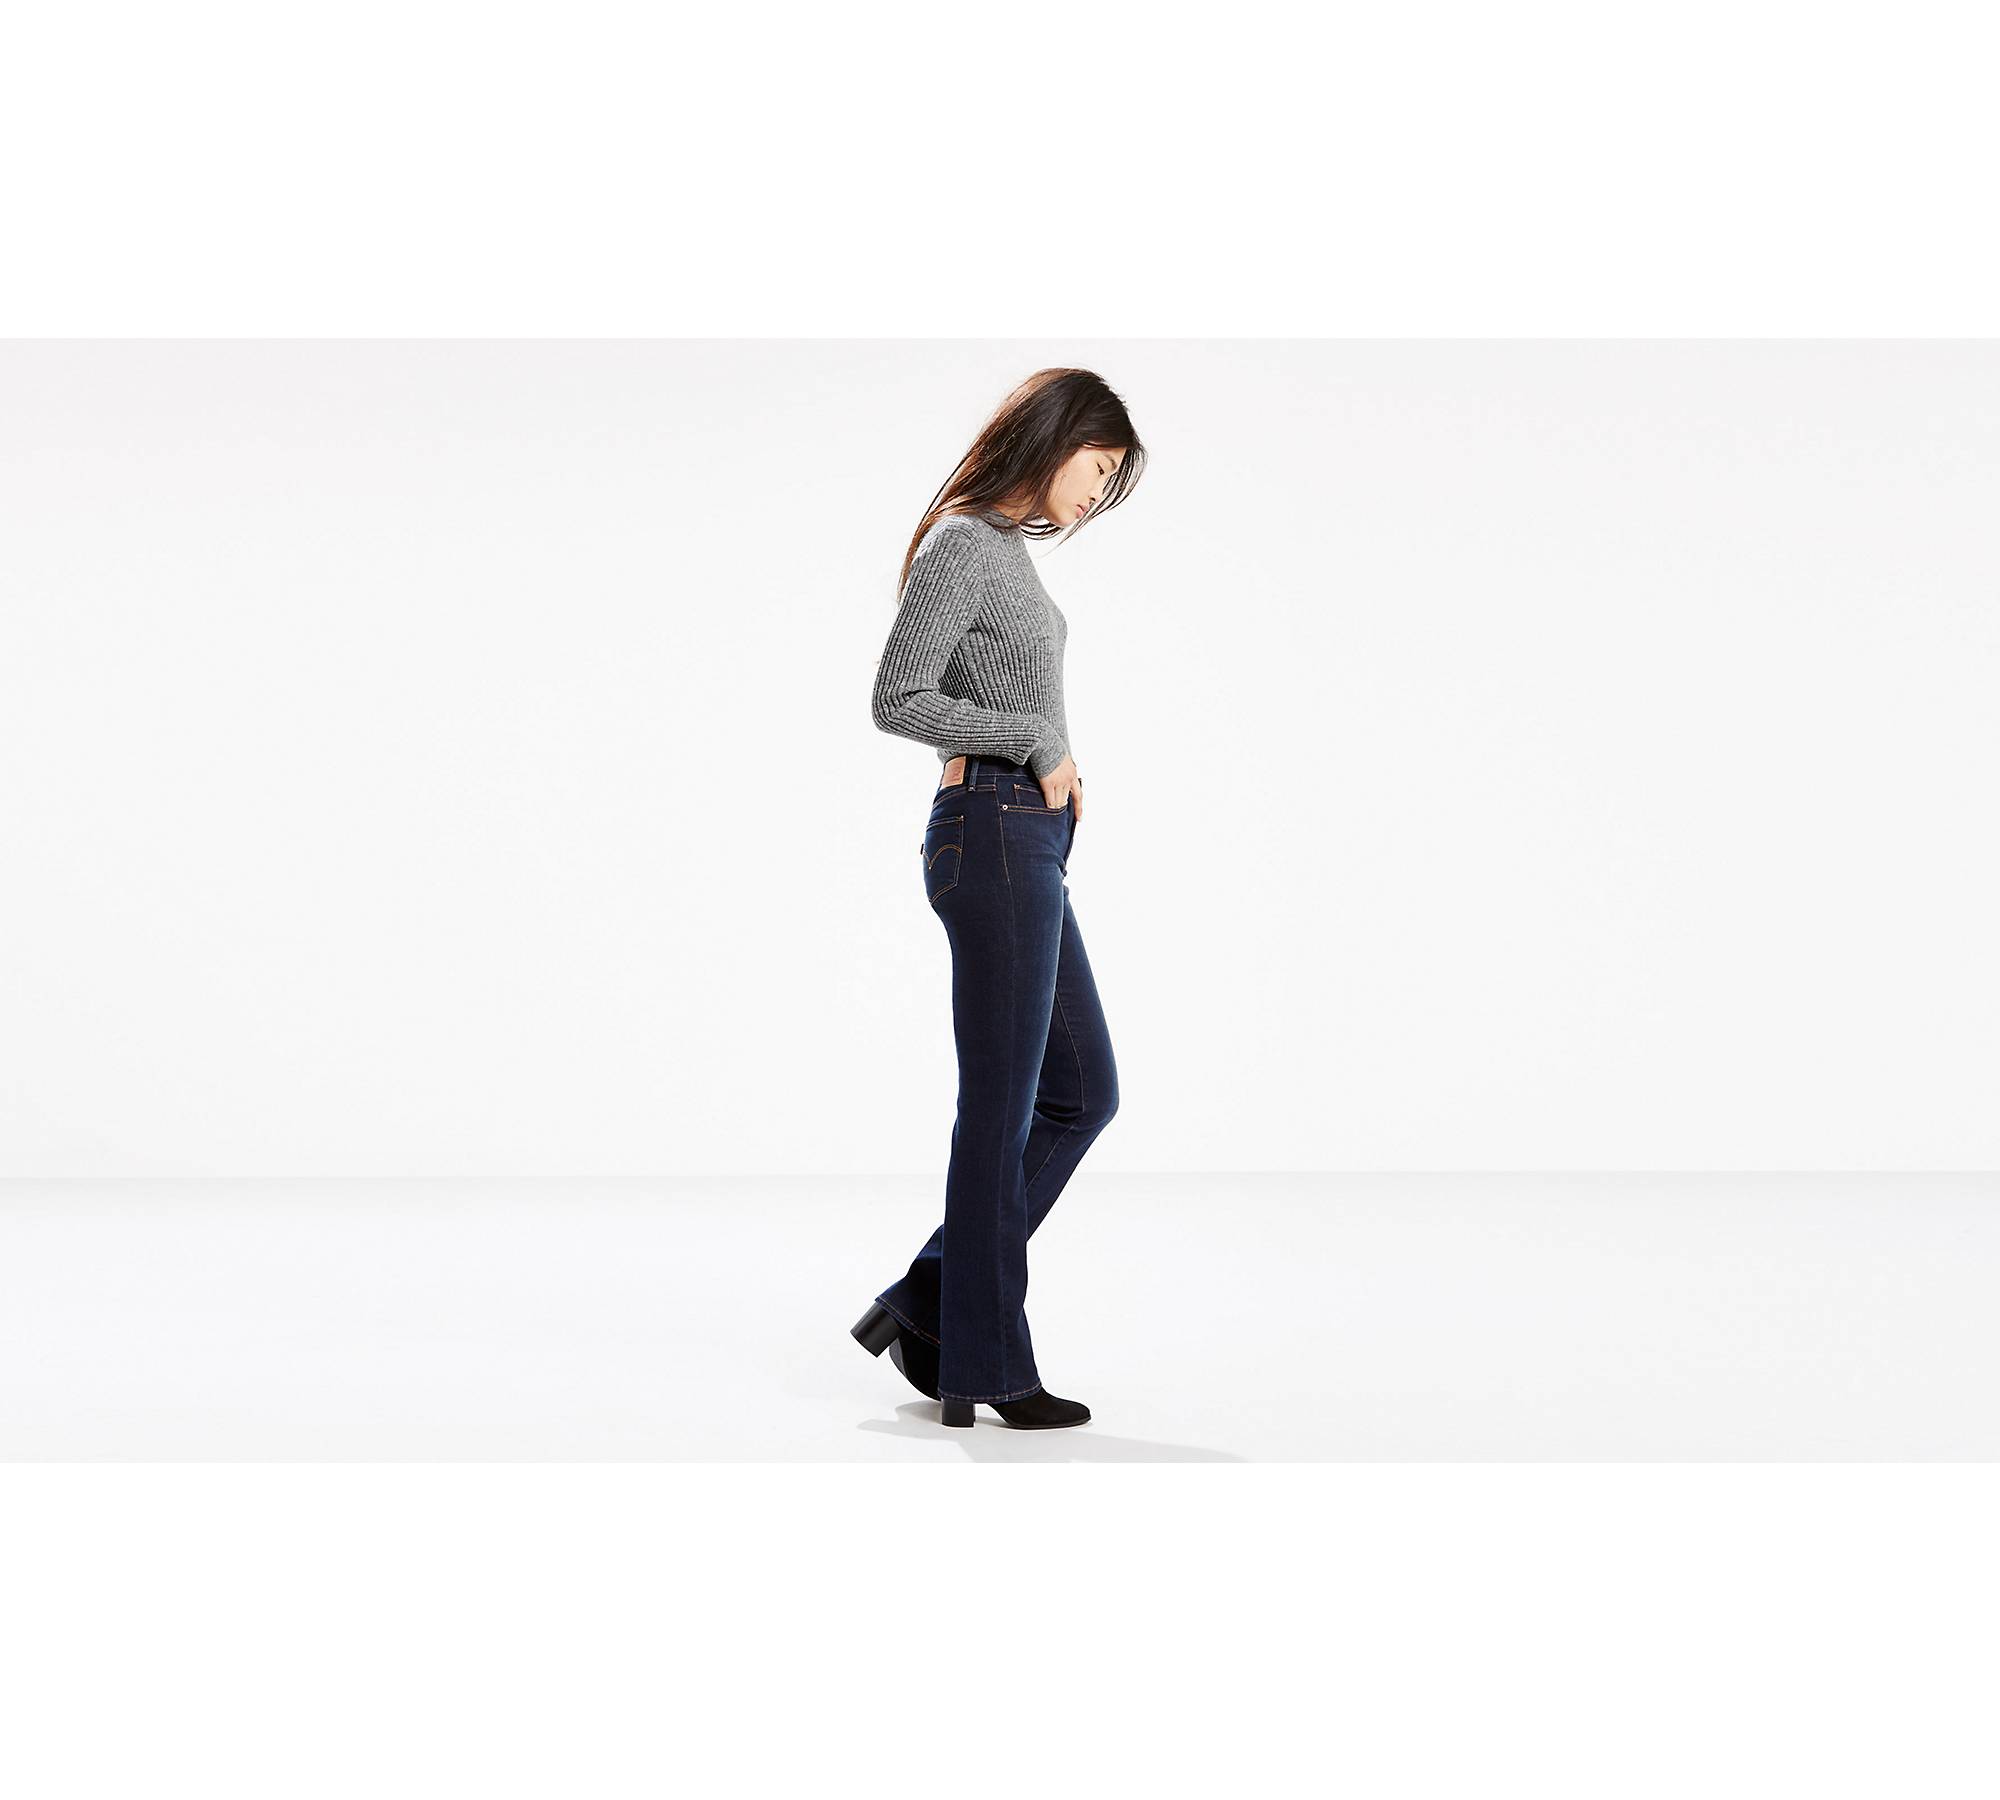 315 Shaping Bootcut Women's Jeans - Dark Wash | Levi's® US